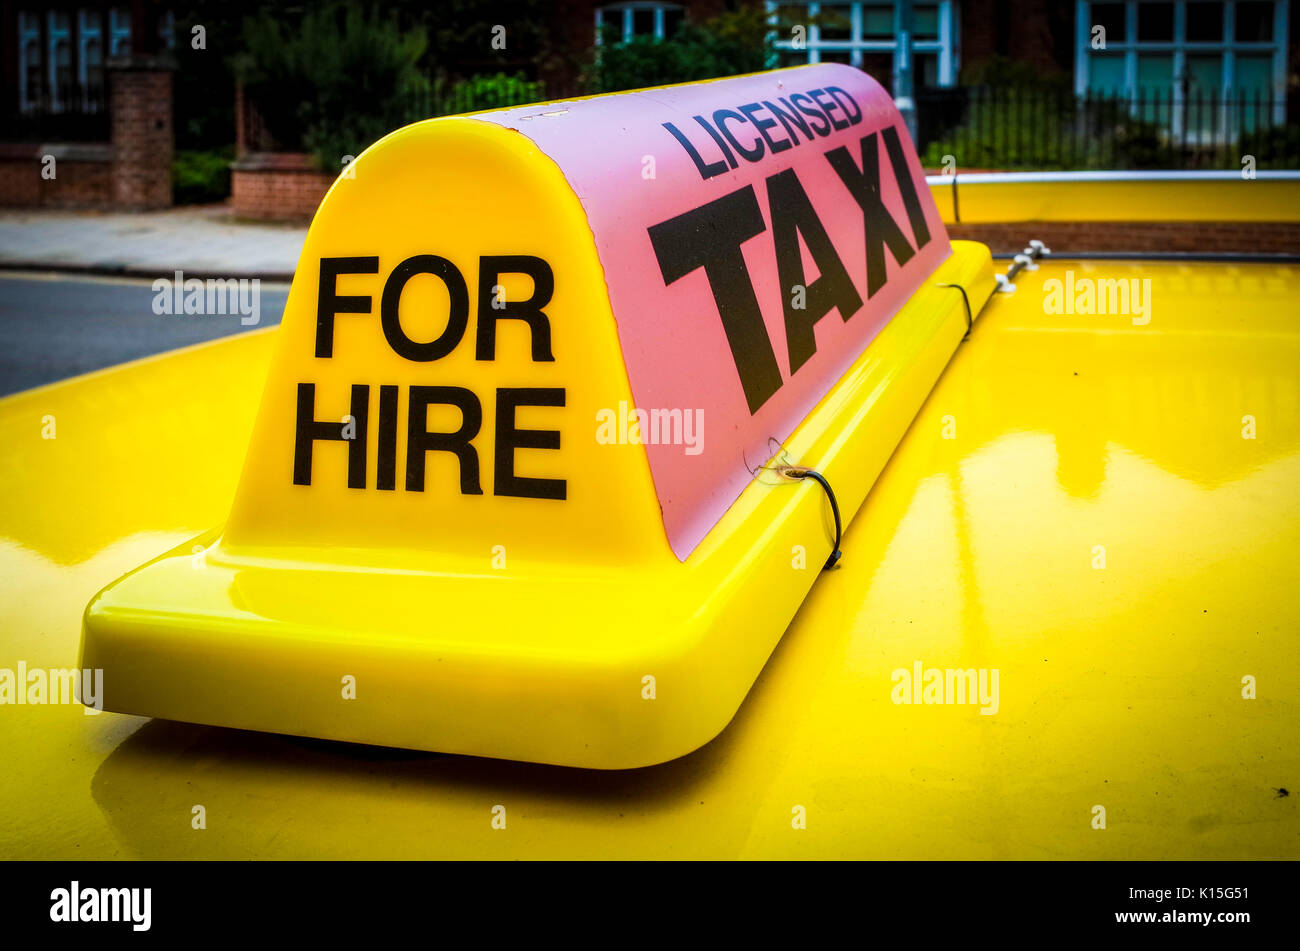 For Hire Taxi Sign on a Cambridge City licensed Taxi Cab Stock Photo